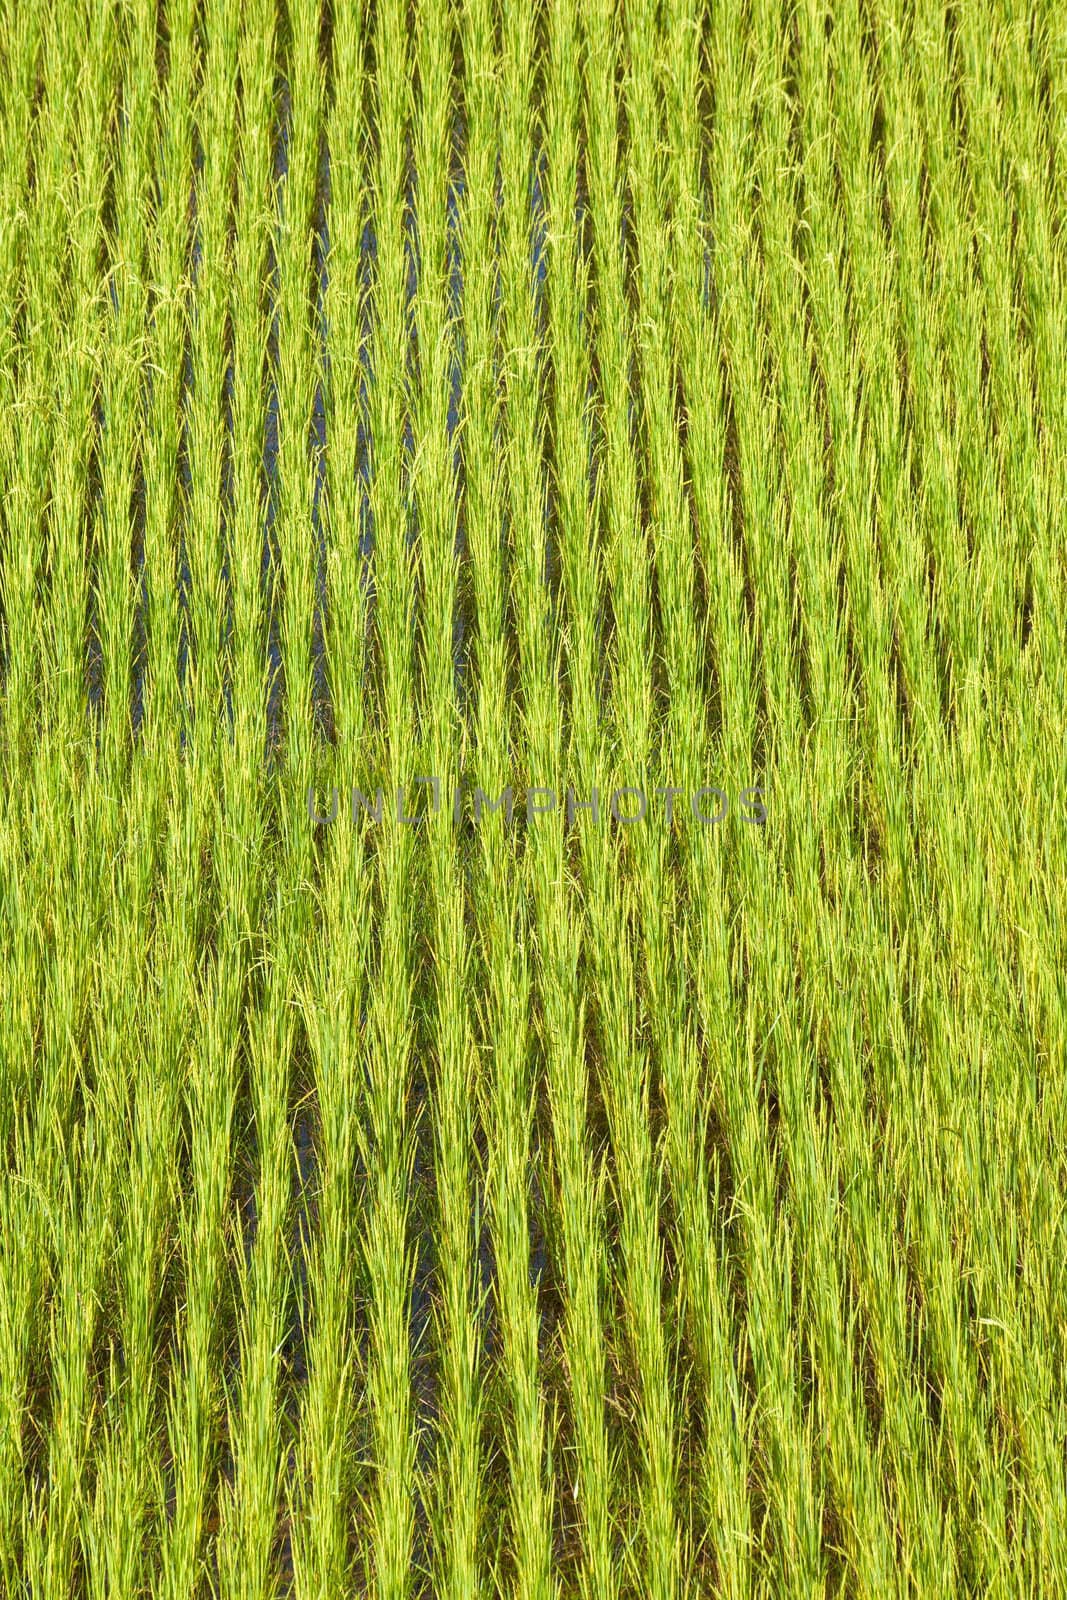 Green paddy field background in Madagascar